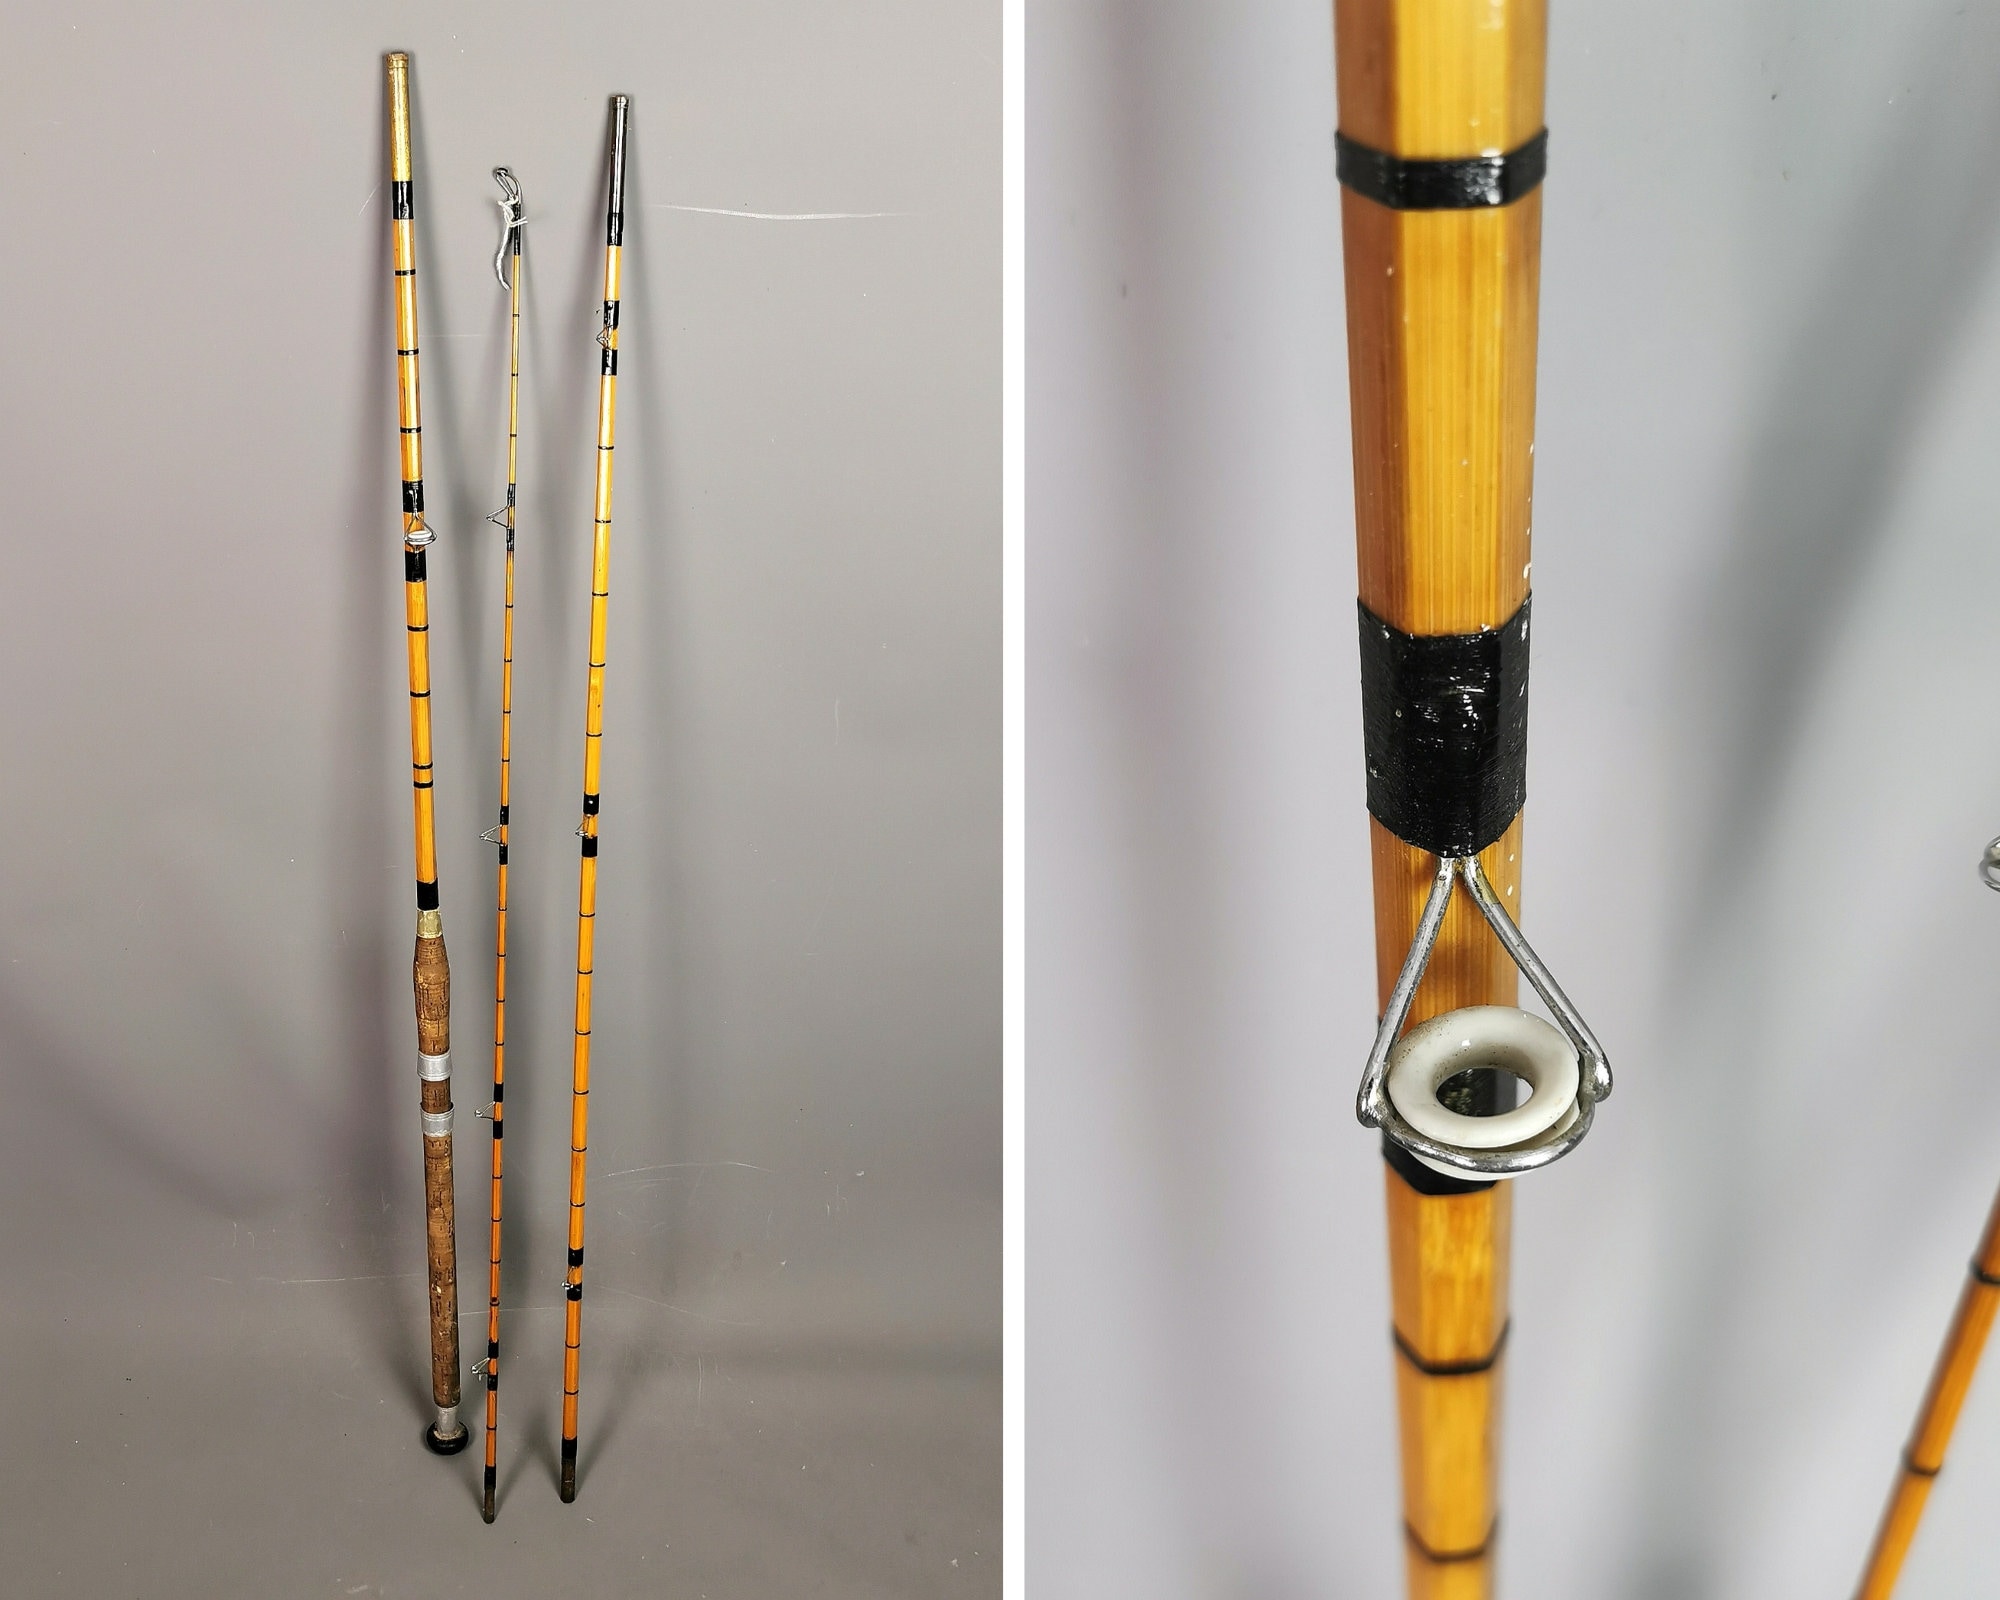 Buy Fishing Rod Bamboo Online In India -  India